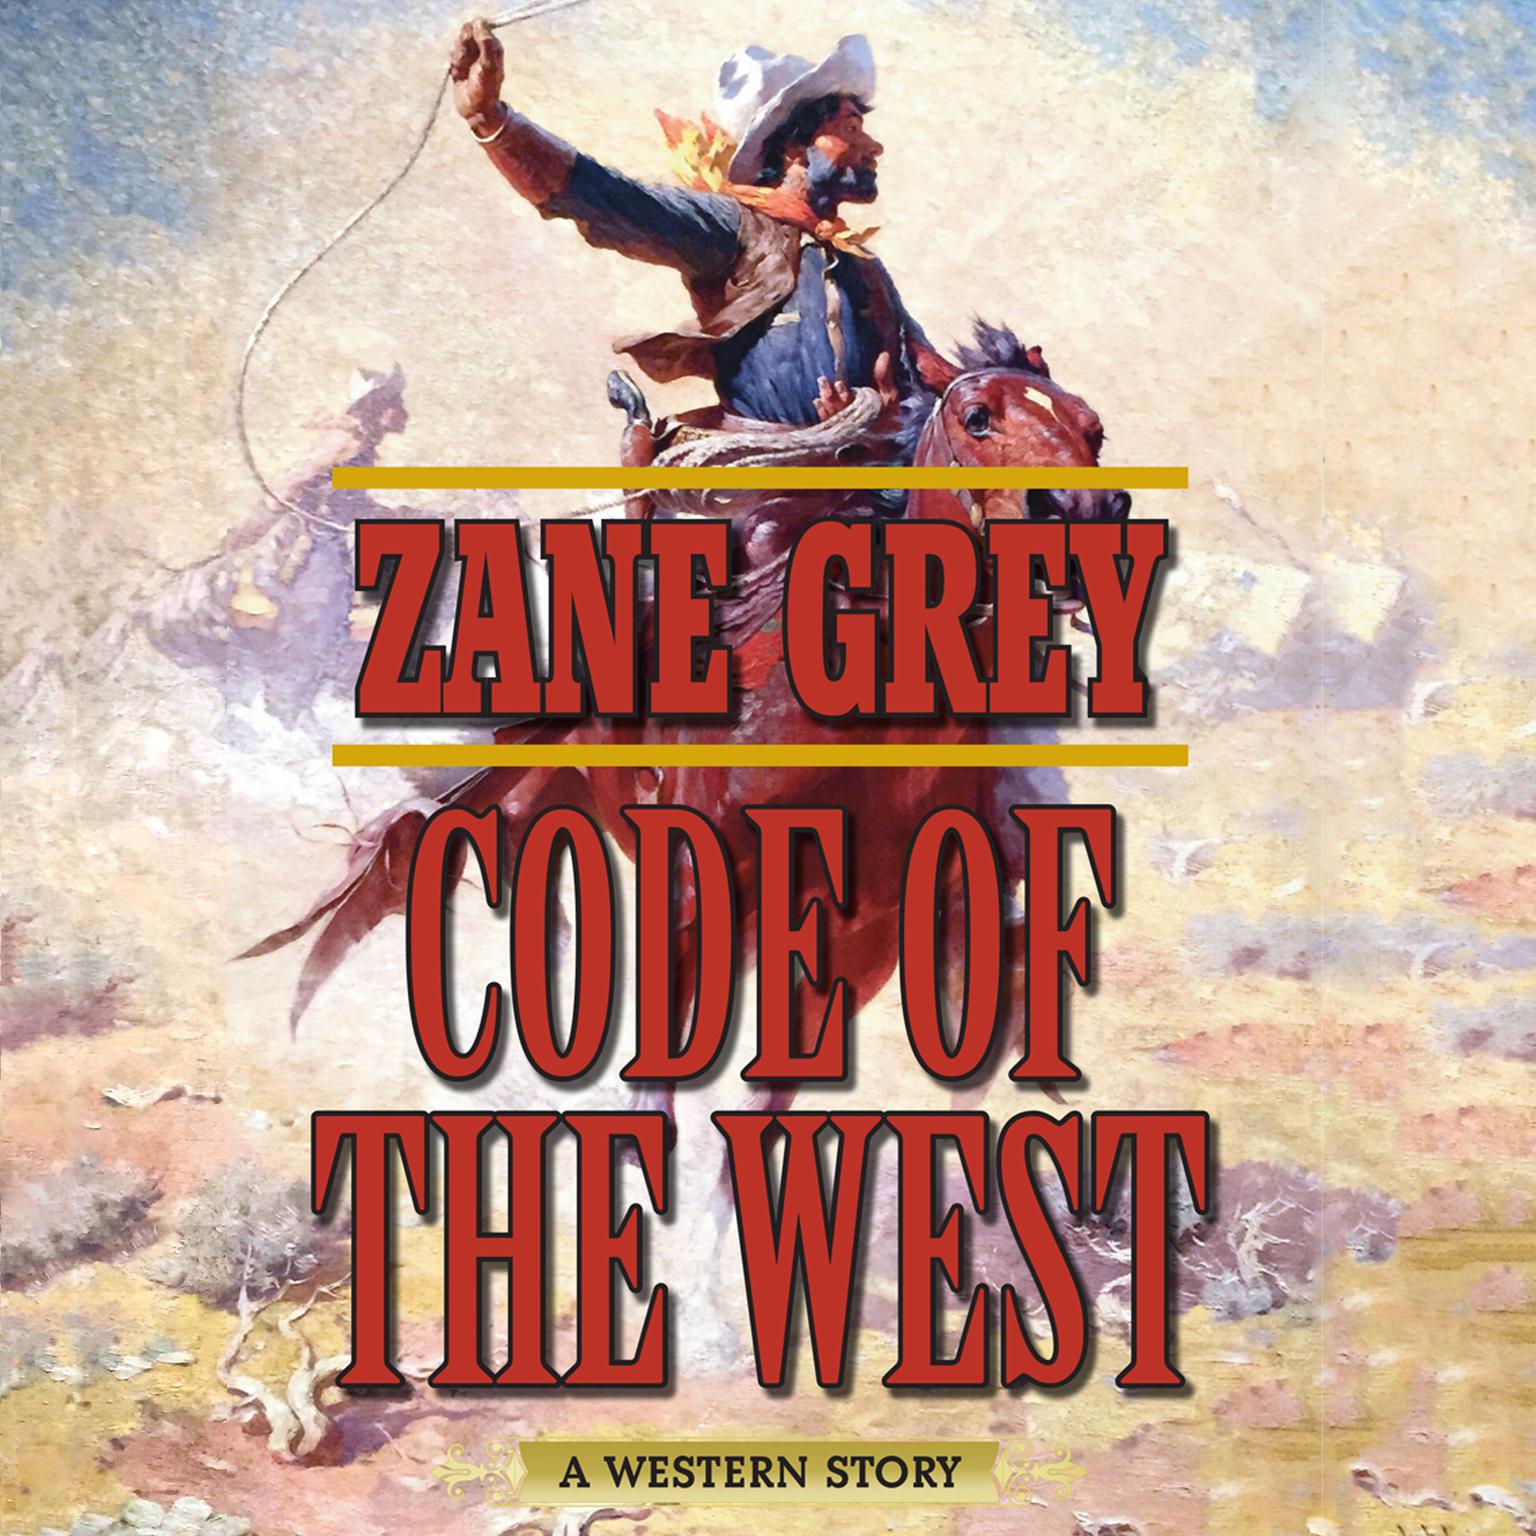 Code of the West: A Western Story Audiobook, by Zane Grey